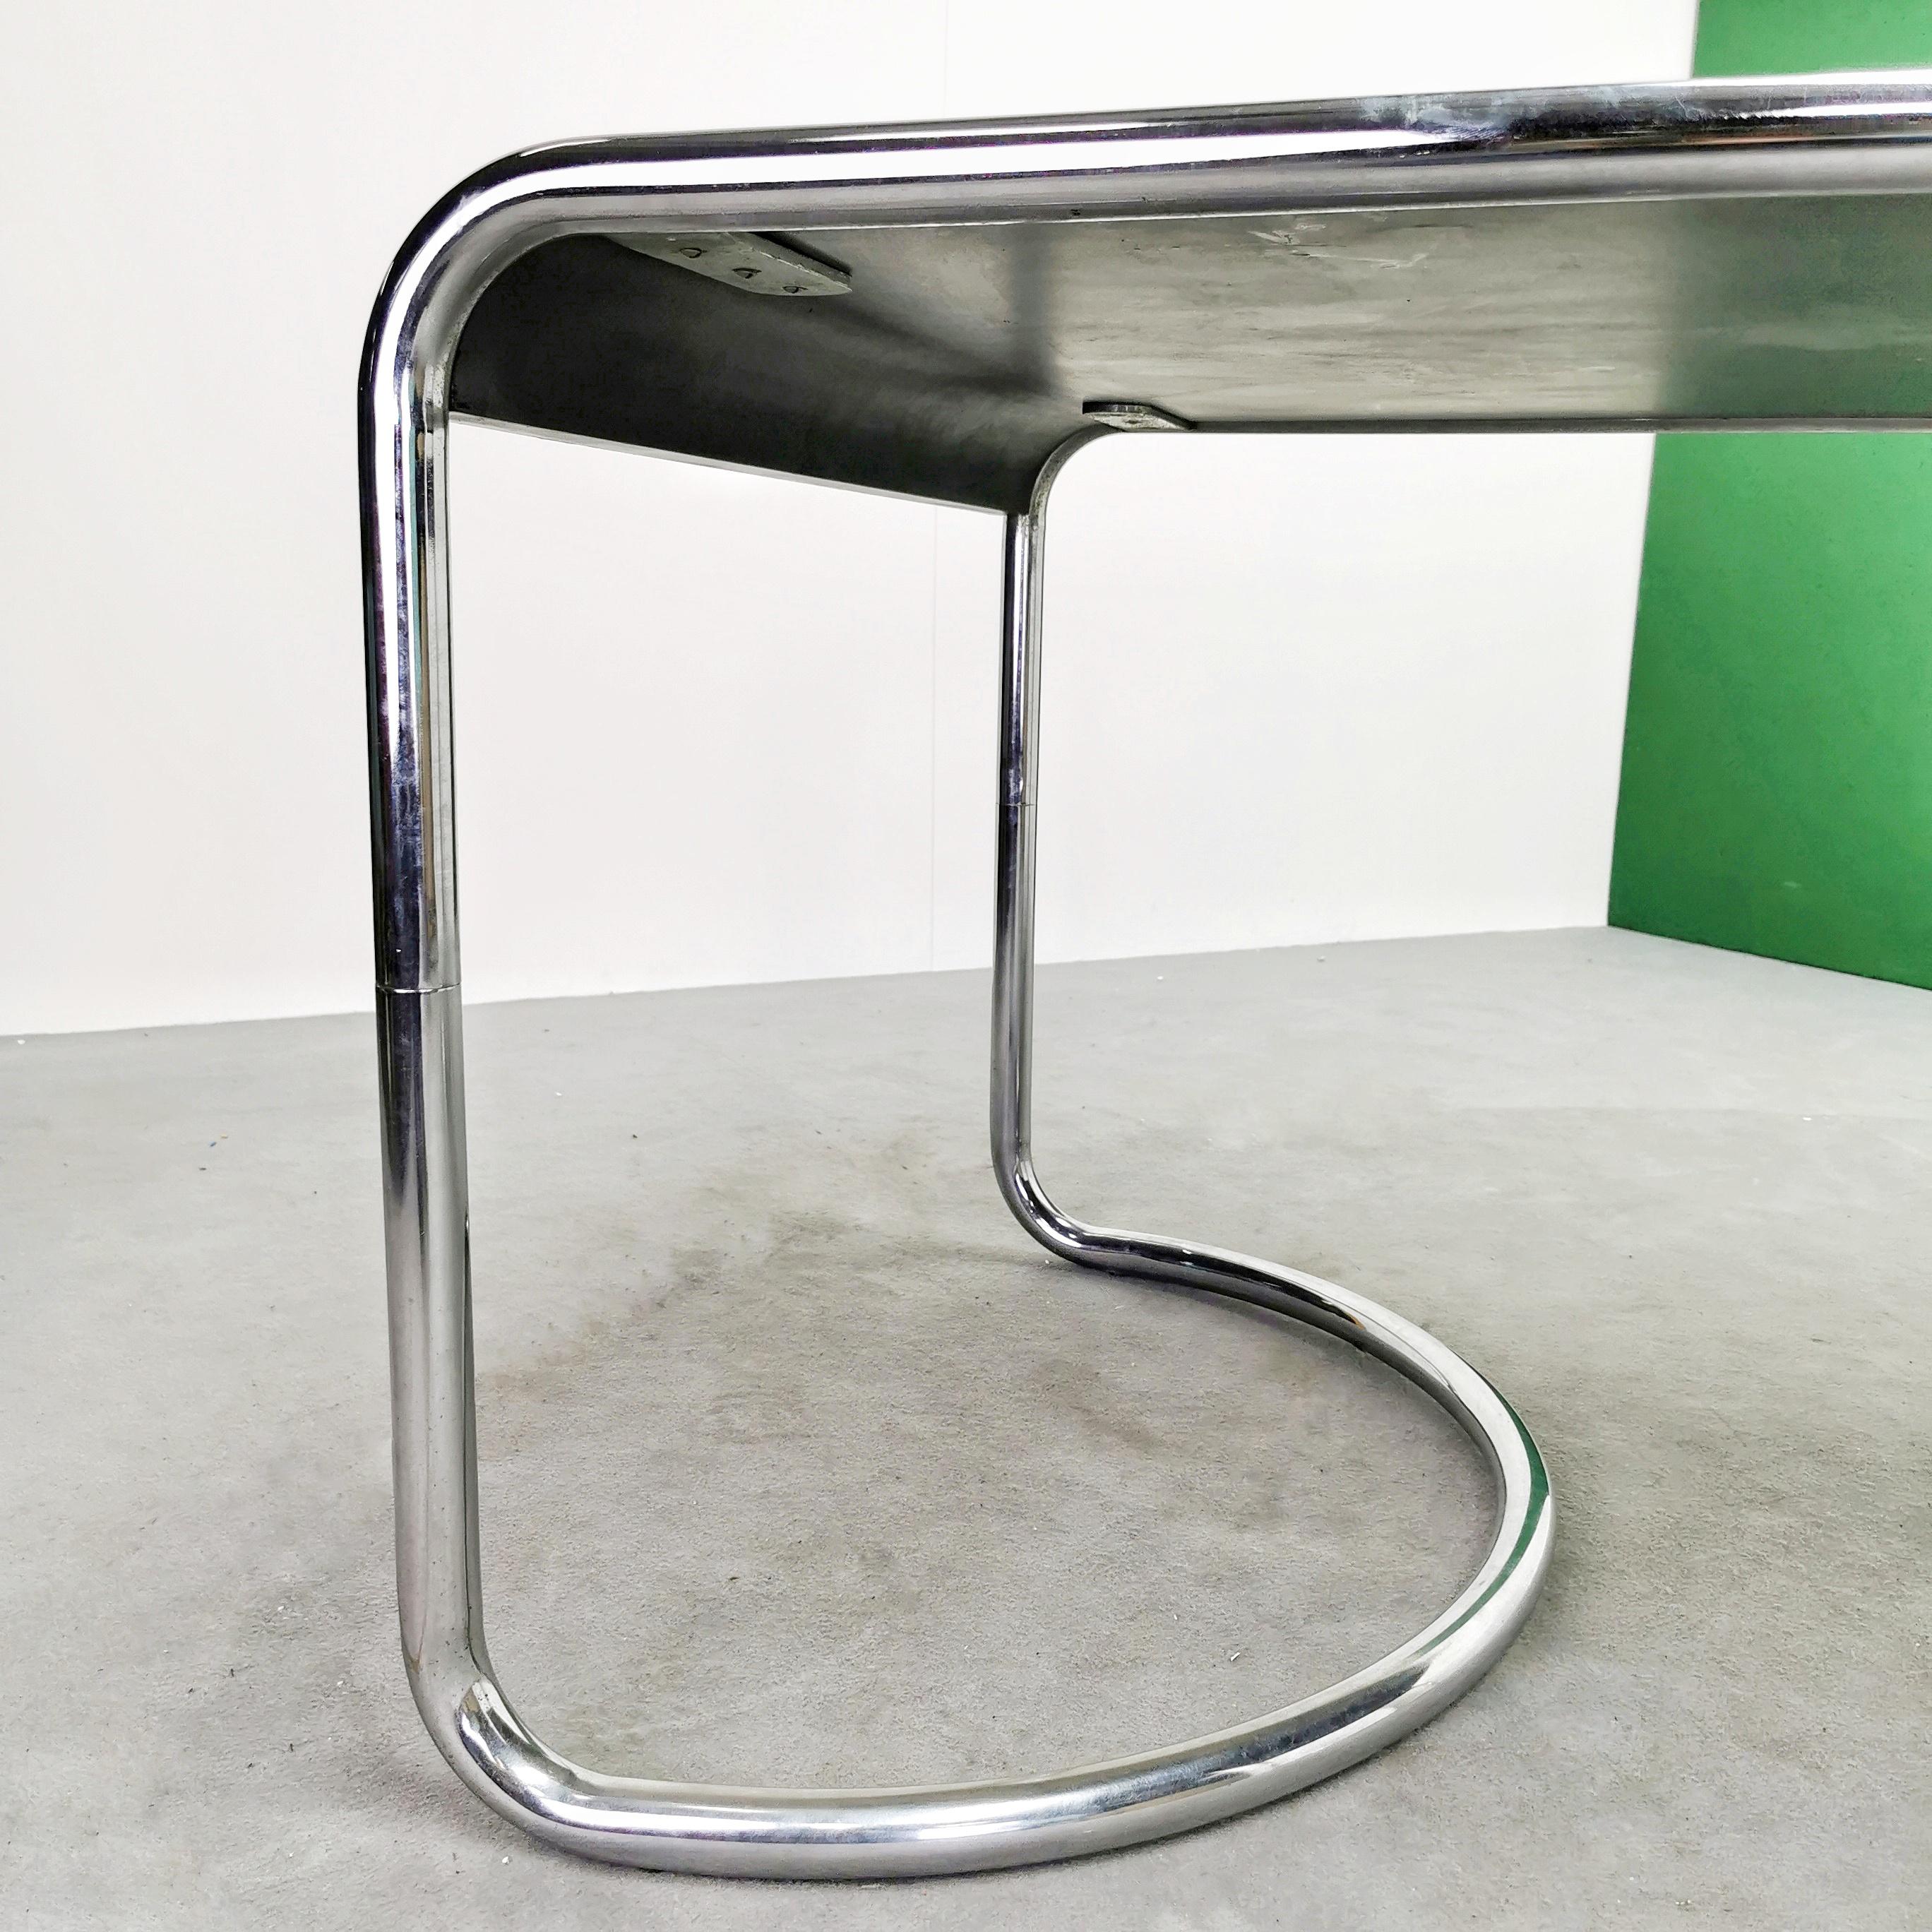 Febo desk or dining table designed by G.Stoppino for Driade 1970 For Sale 2